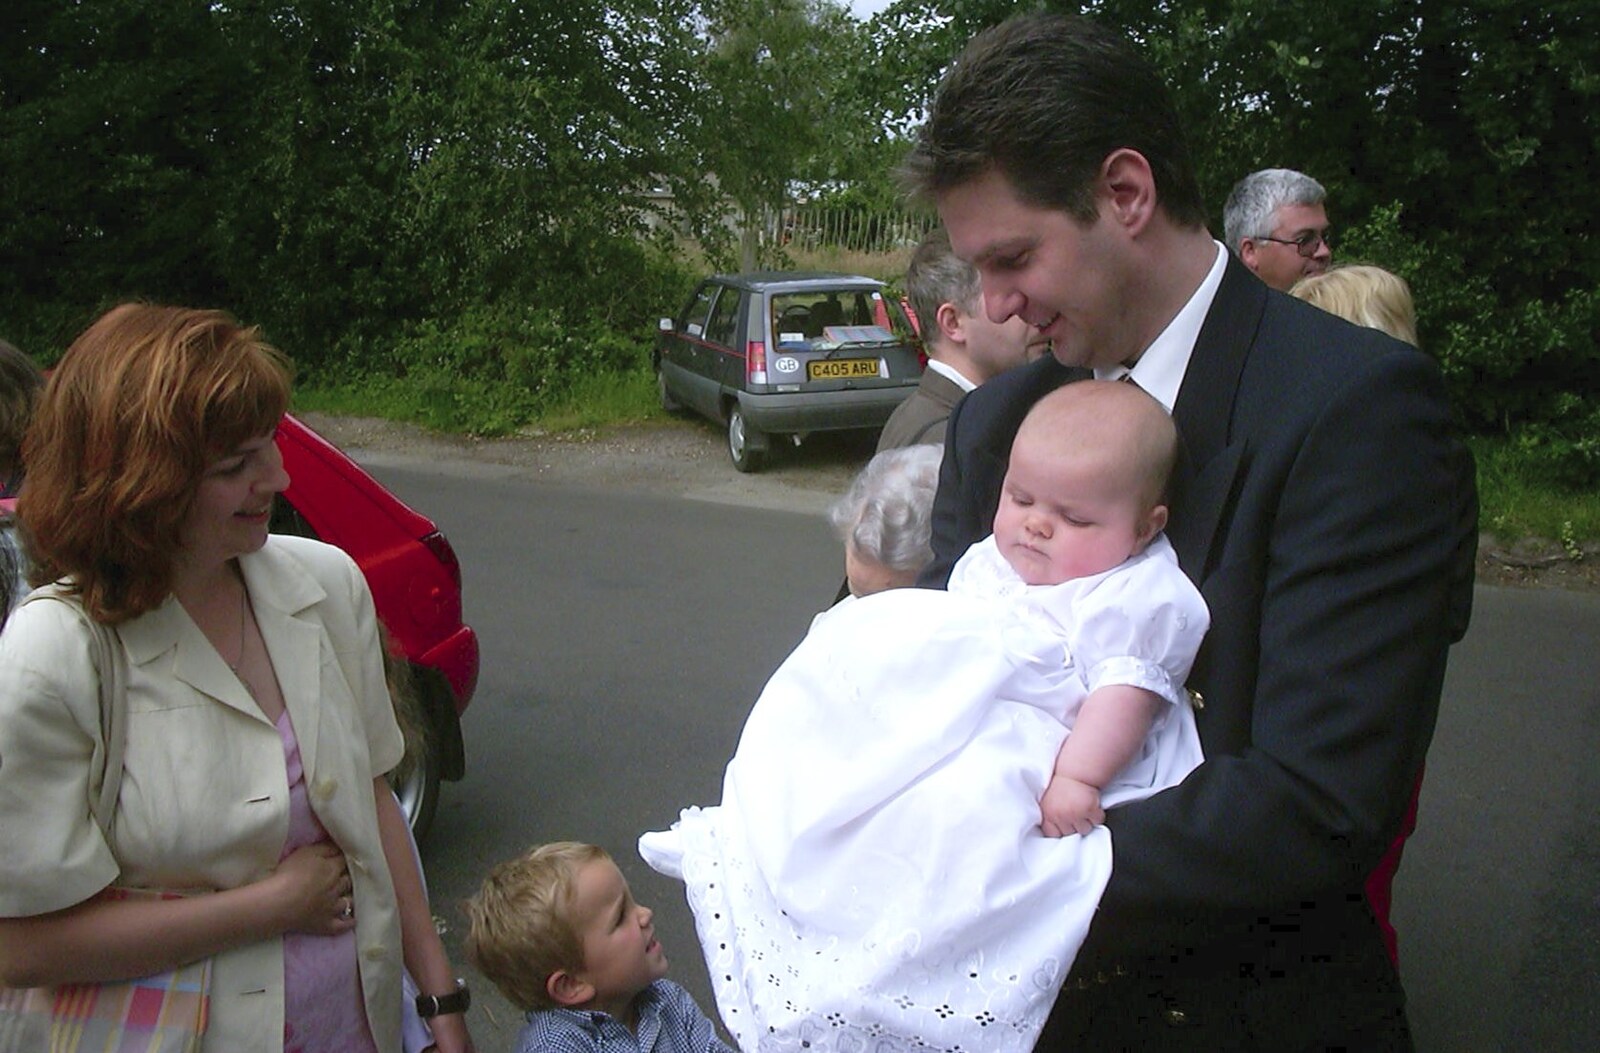 Sean and Syd again from Sydney's Christening, Hordle, Hampshire - 4th May 2002